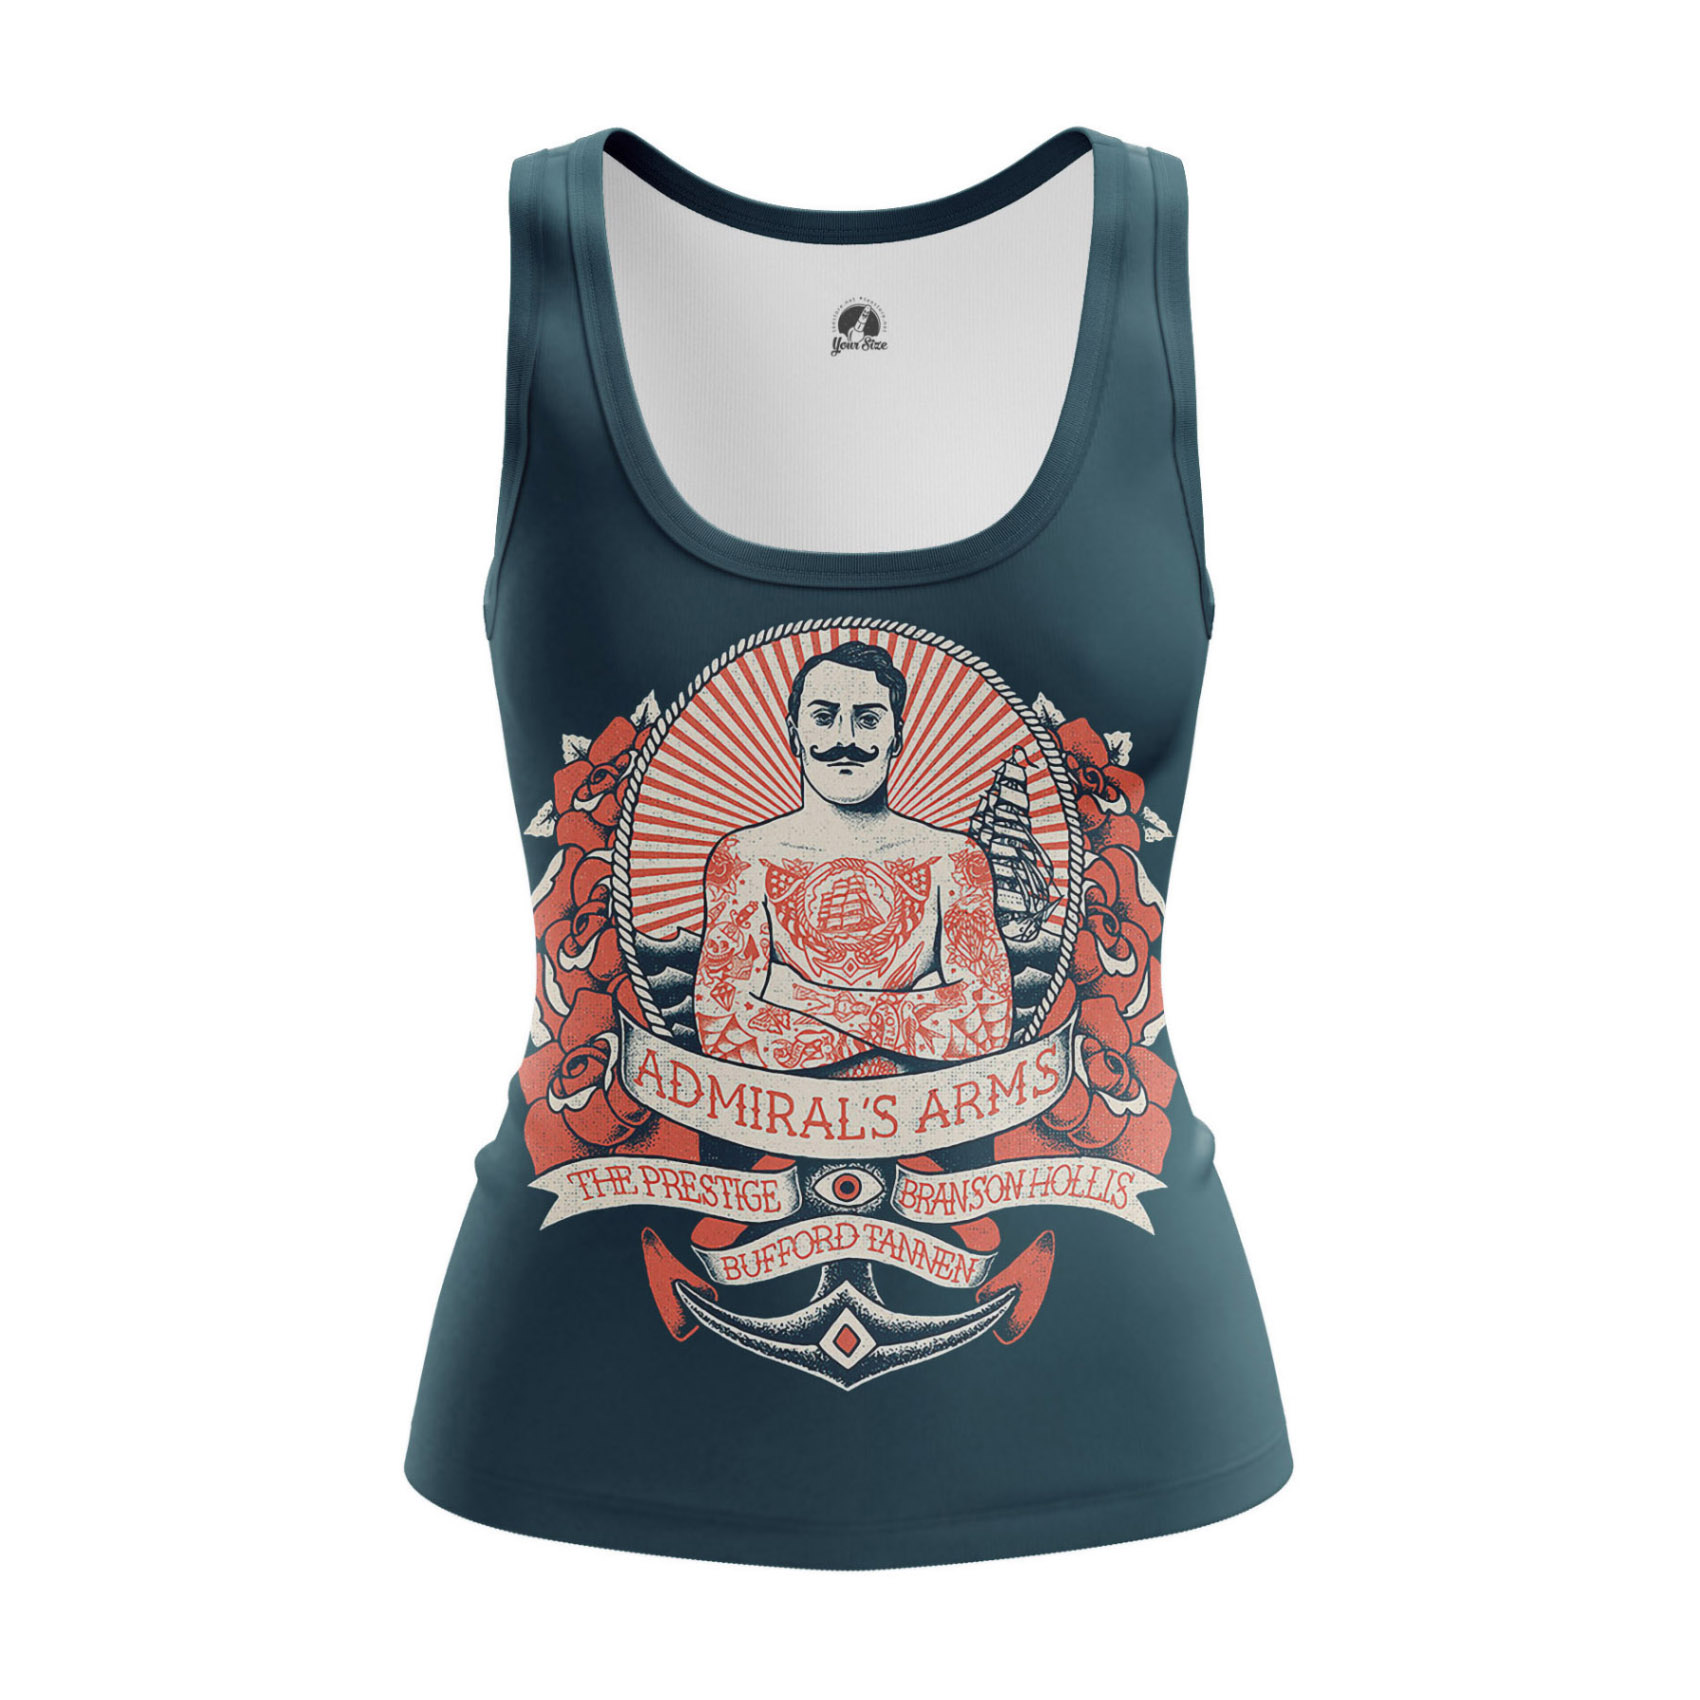 Women’s tank Admirals arms Vest Idolstore - Merchandise and Collectibles Merchandise, Toys and Collectibles 2